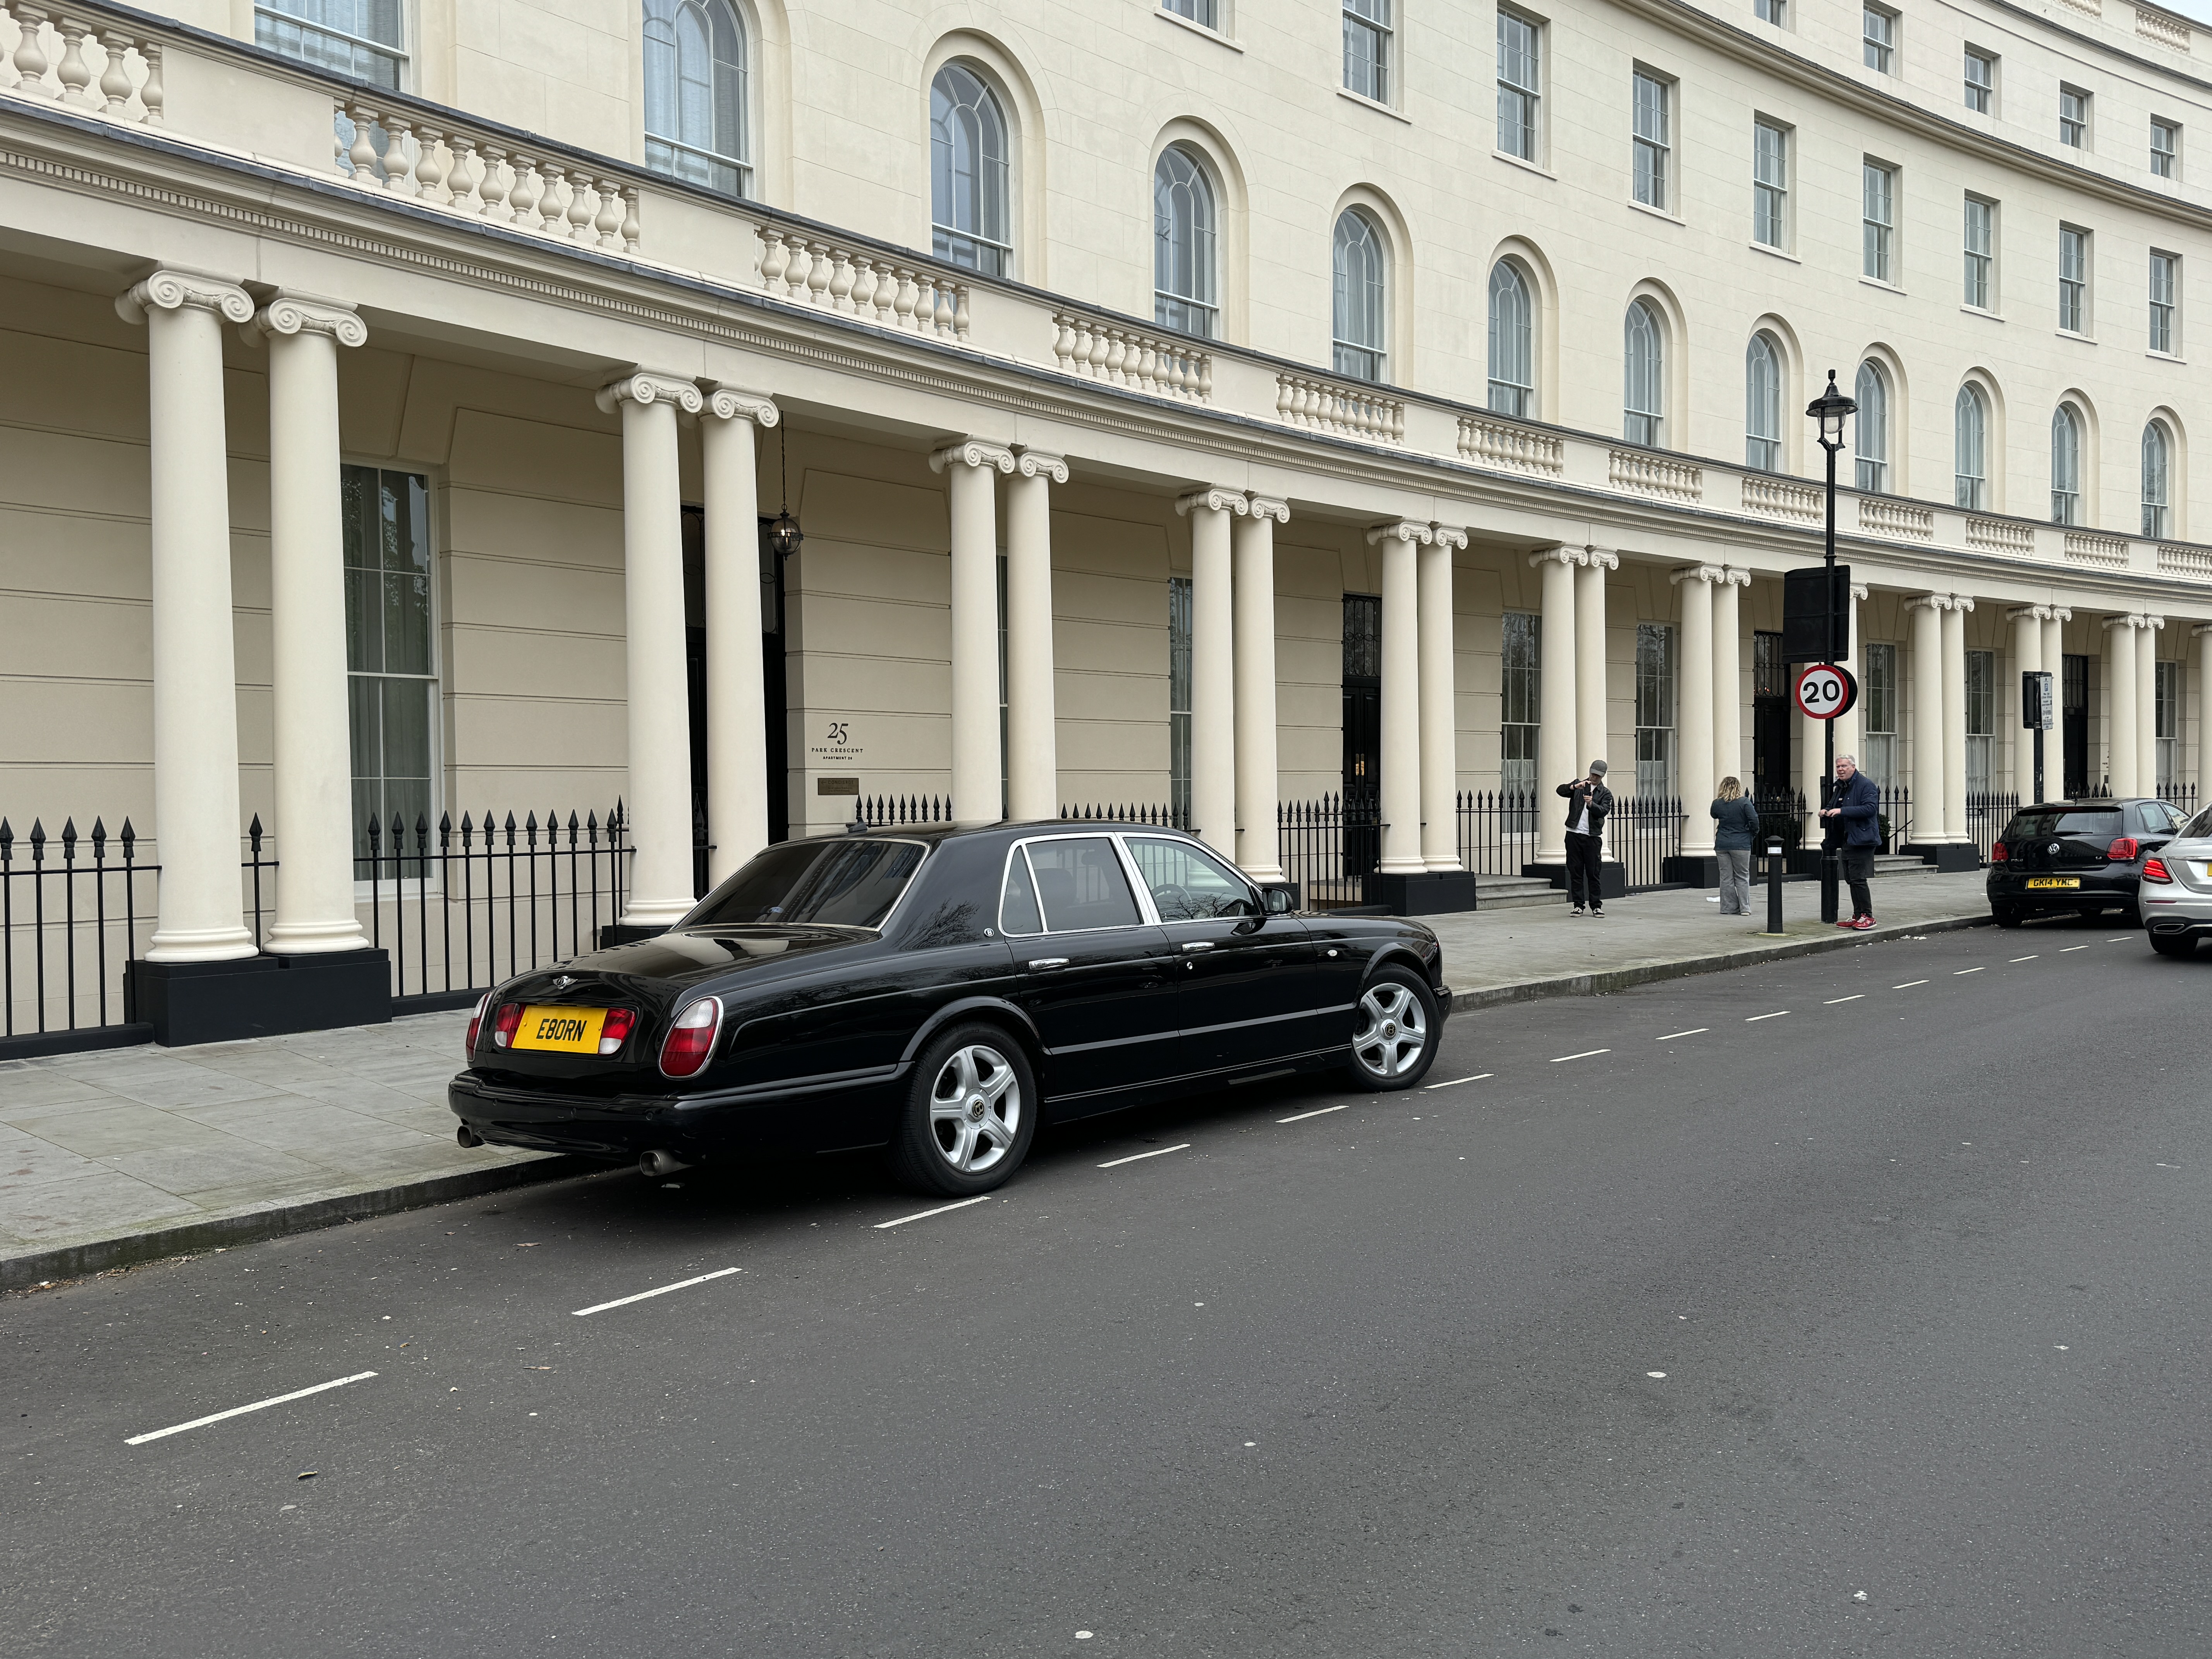 Bentley Arnage R, 6750cc V8 Twin Turbo, Black coachwork with matching black leather upholstery and - Image 71 of 78